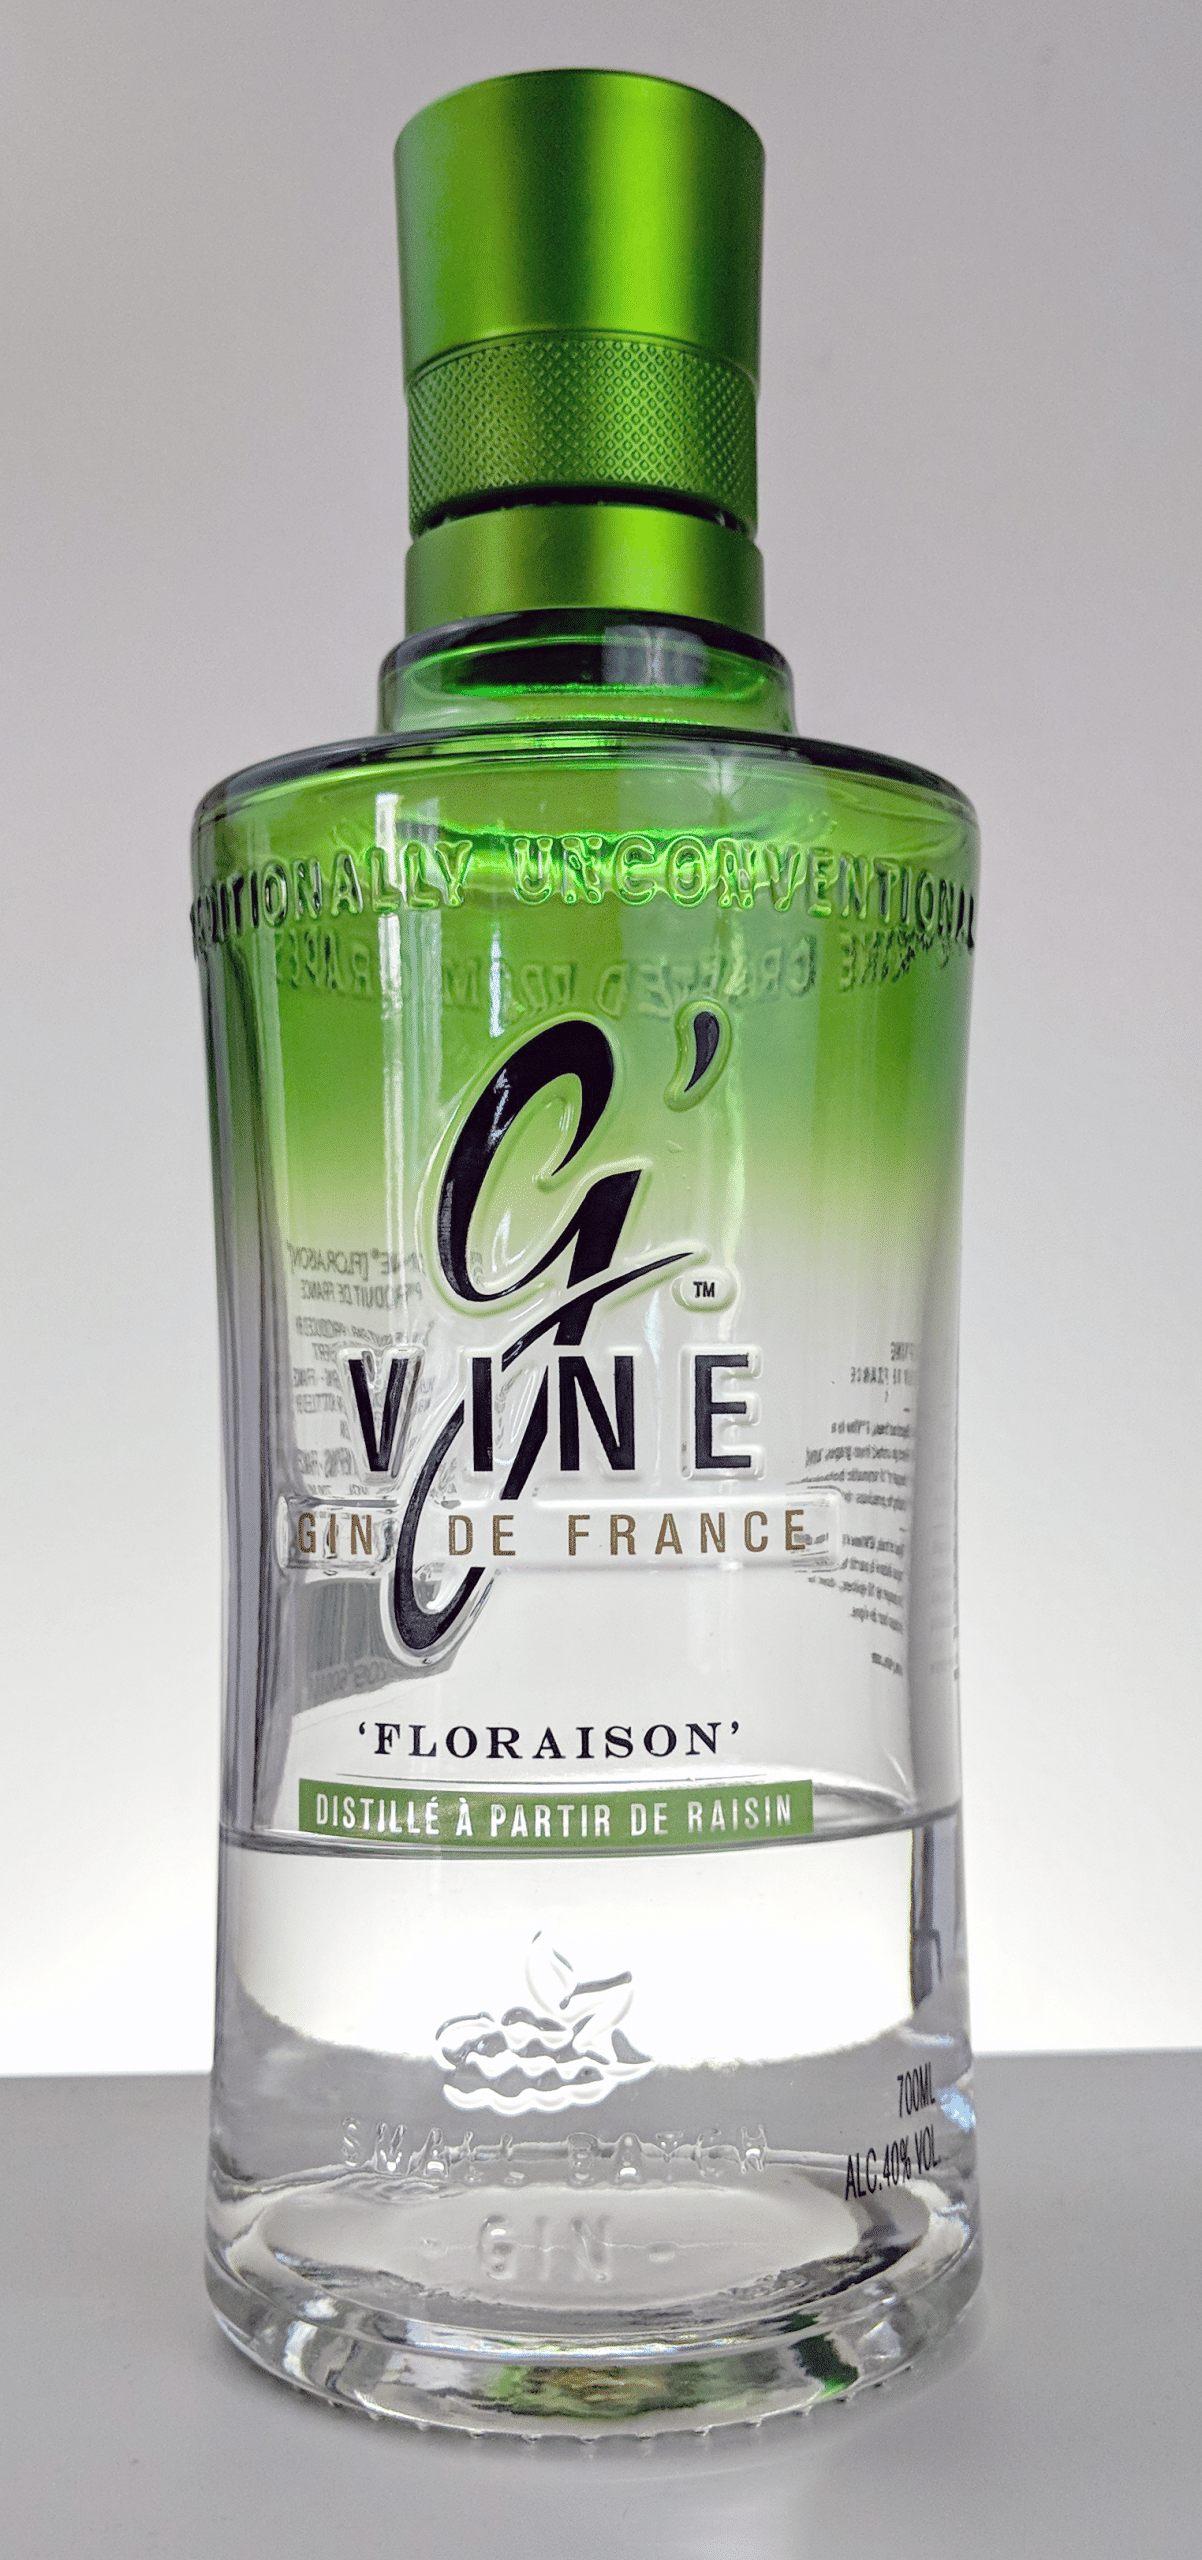 Gin and Tasting Floraison Review Expert Notes | G\'vine